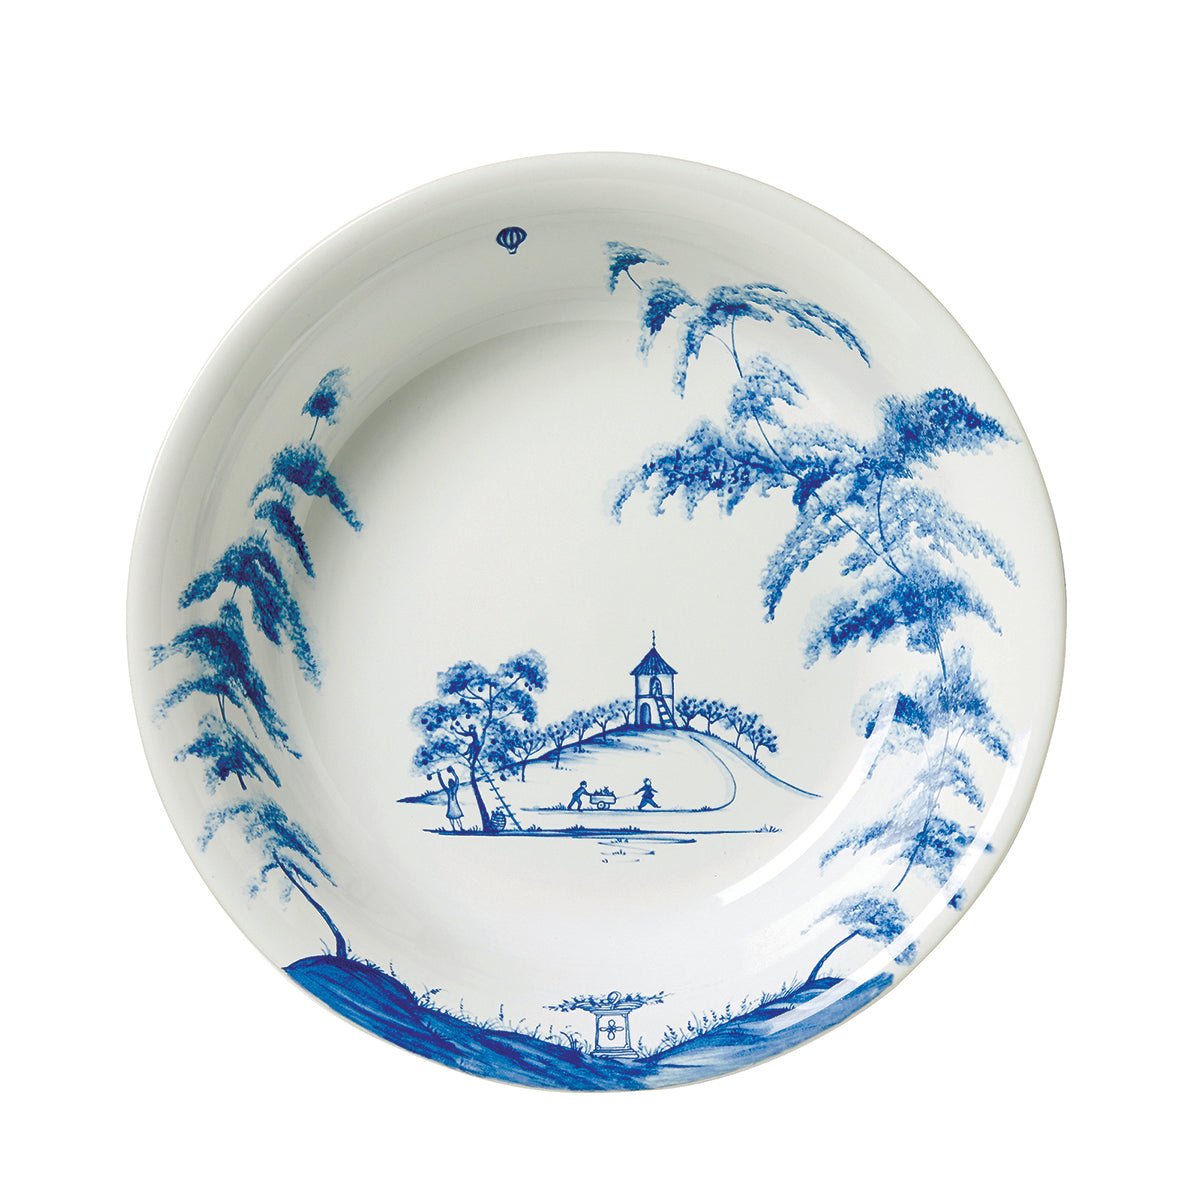 33639 - Country Estate Serving Bowl in Delft Blue - $160- PURCHASED